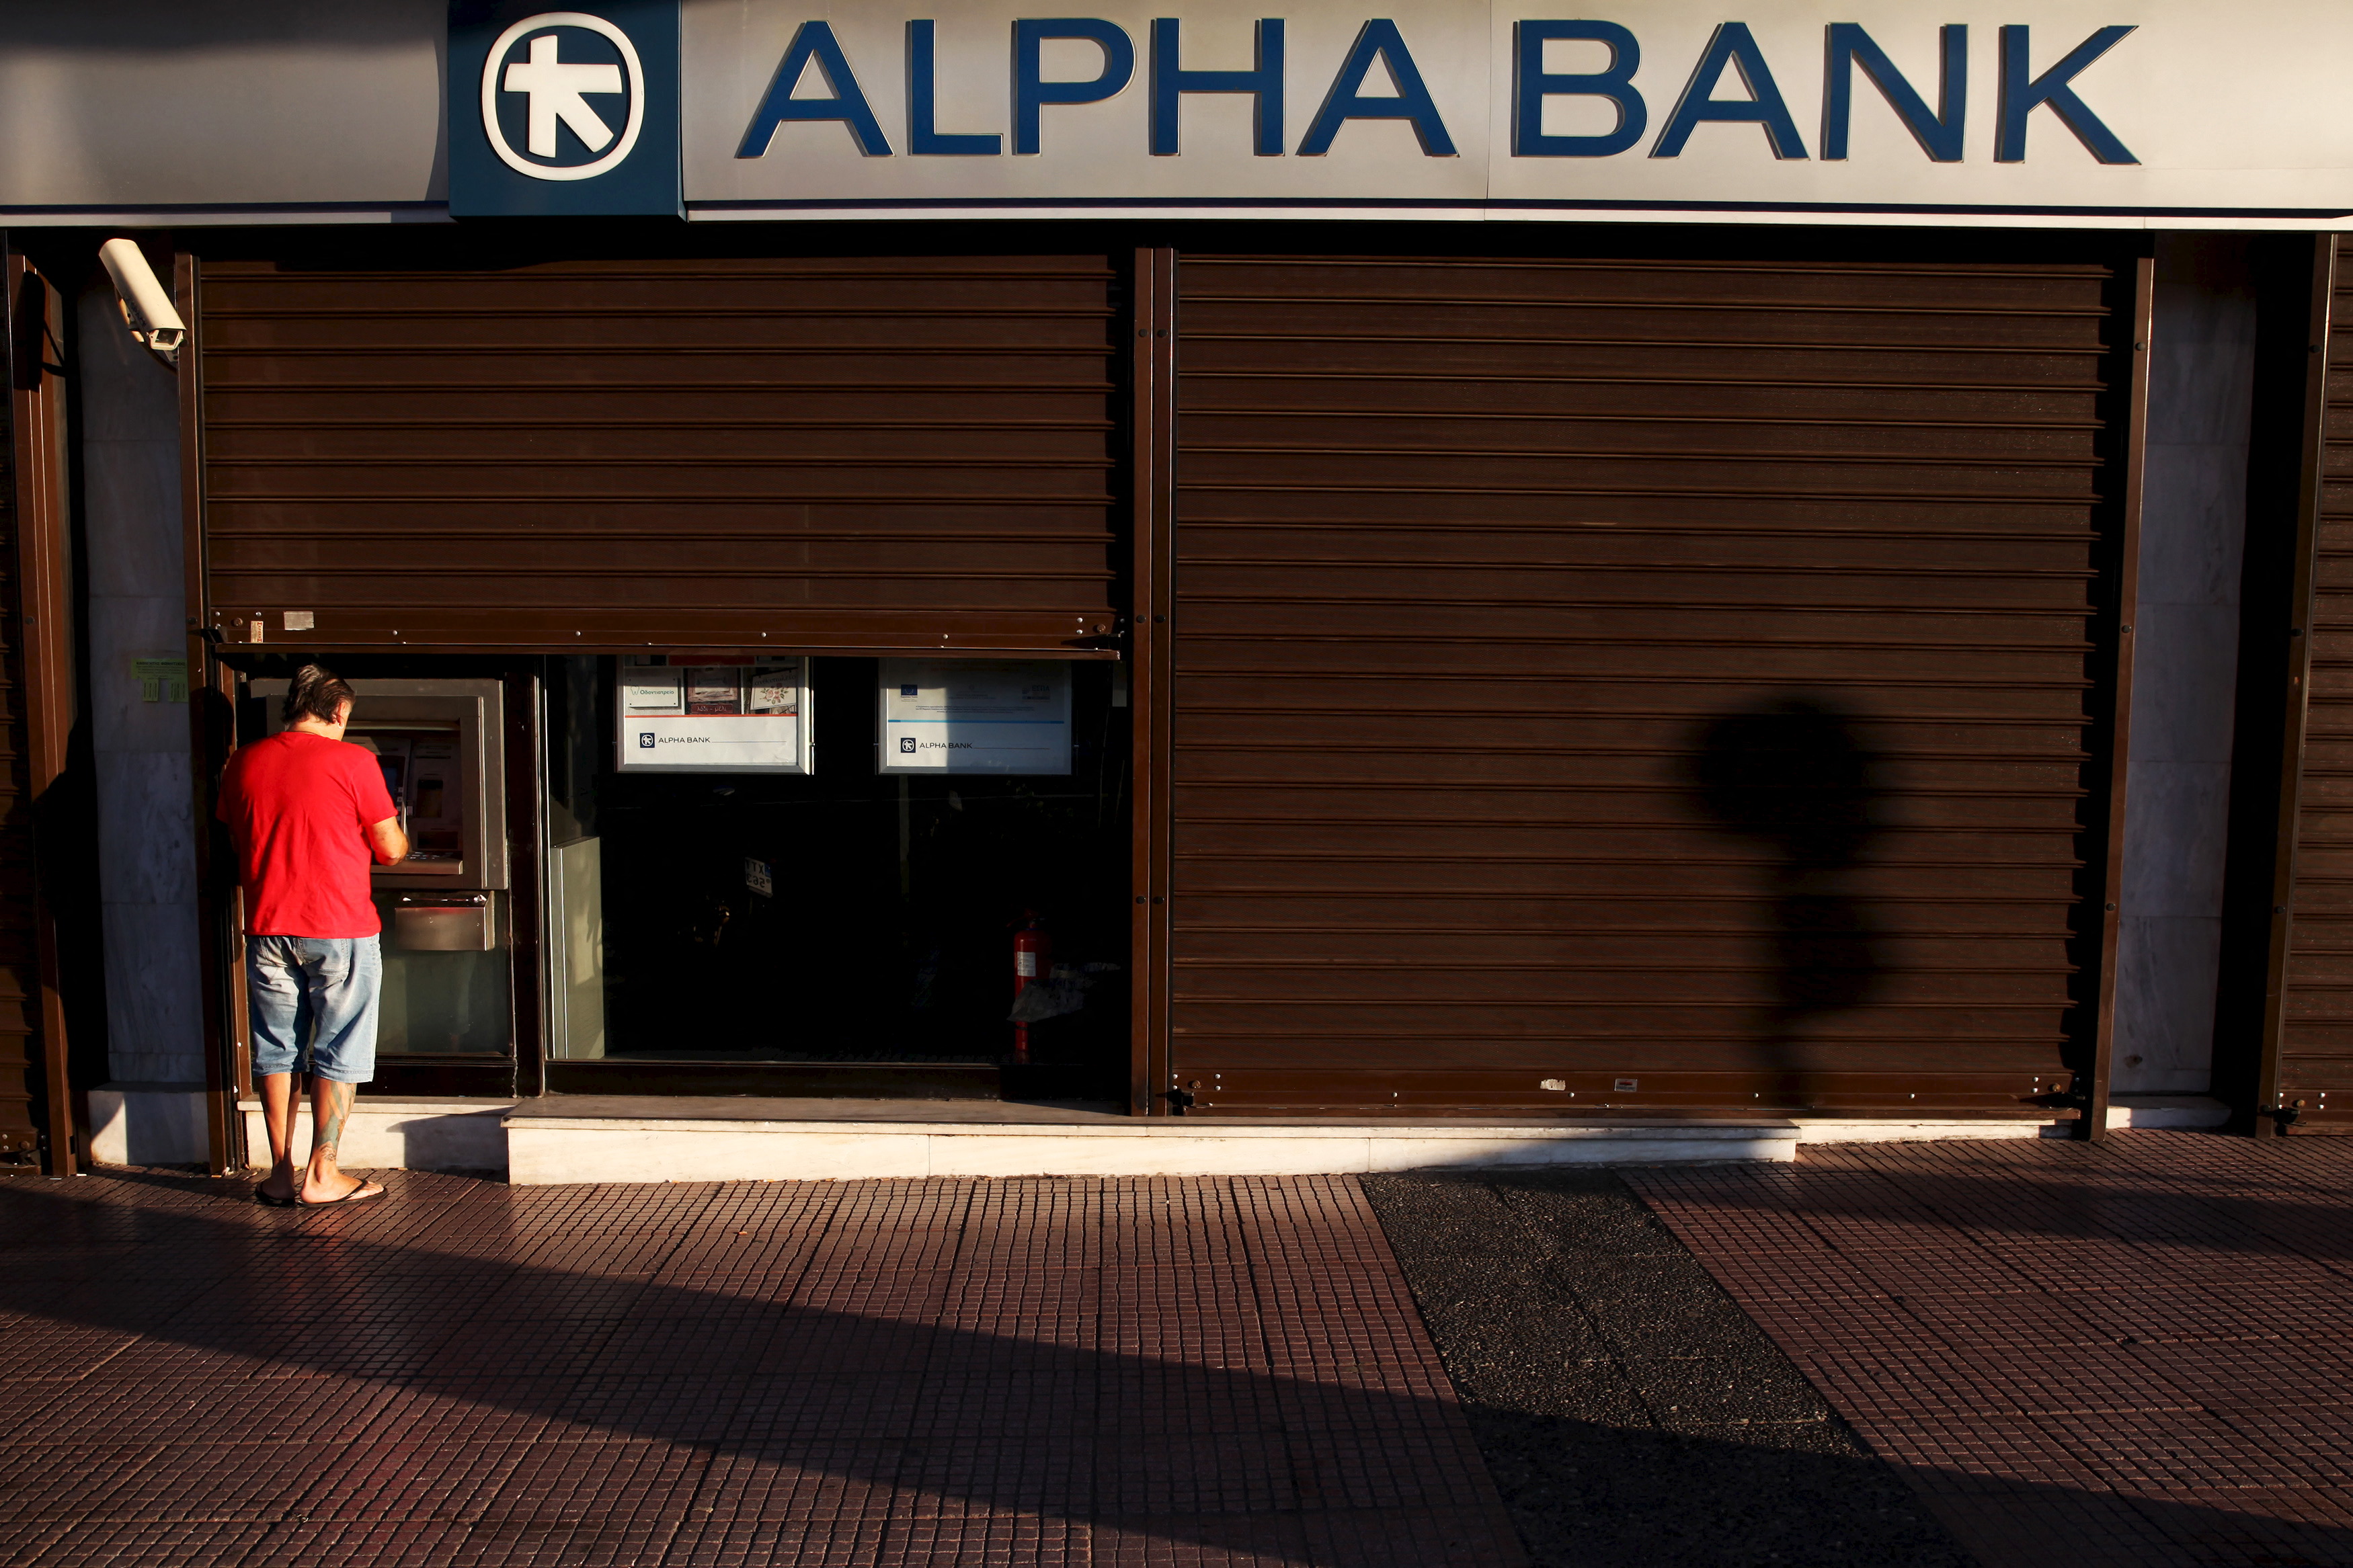 A man withdraws money at an Alpha Bank branch ATM in central Athens